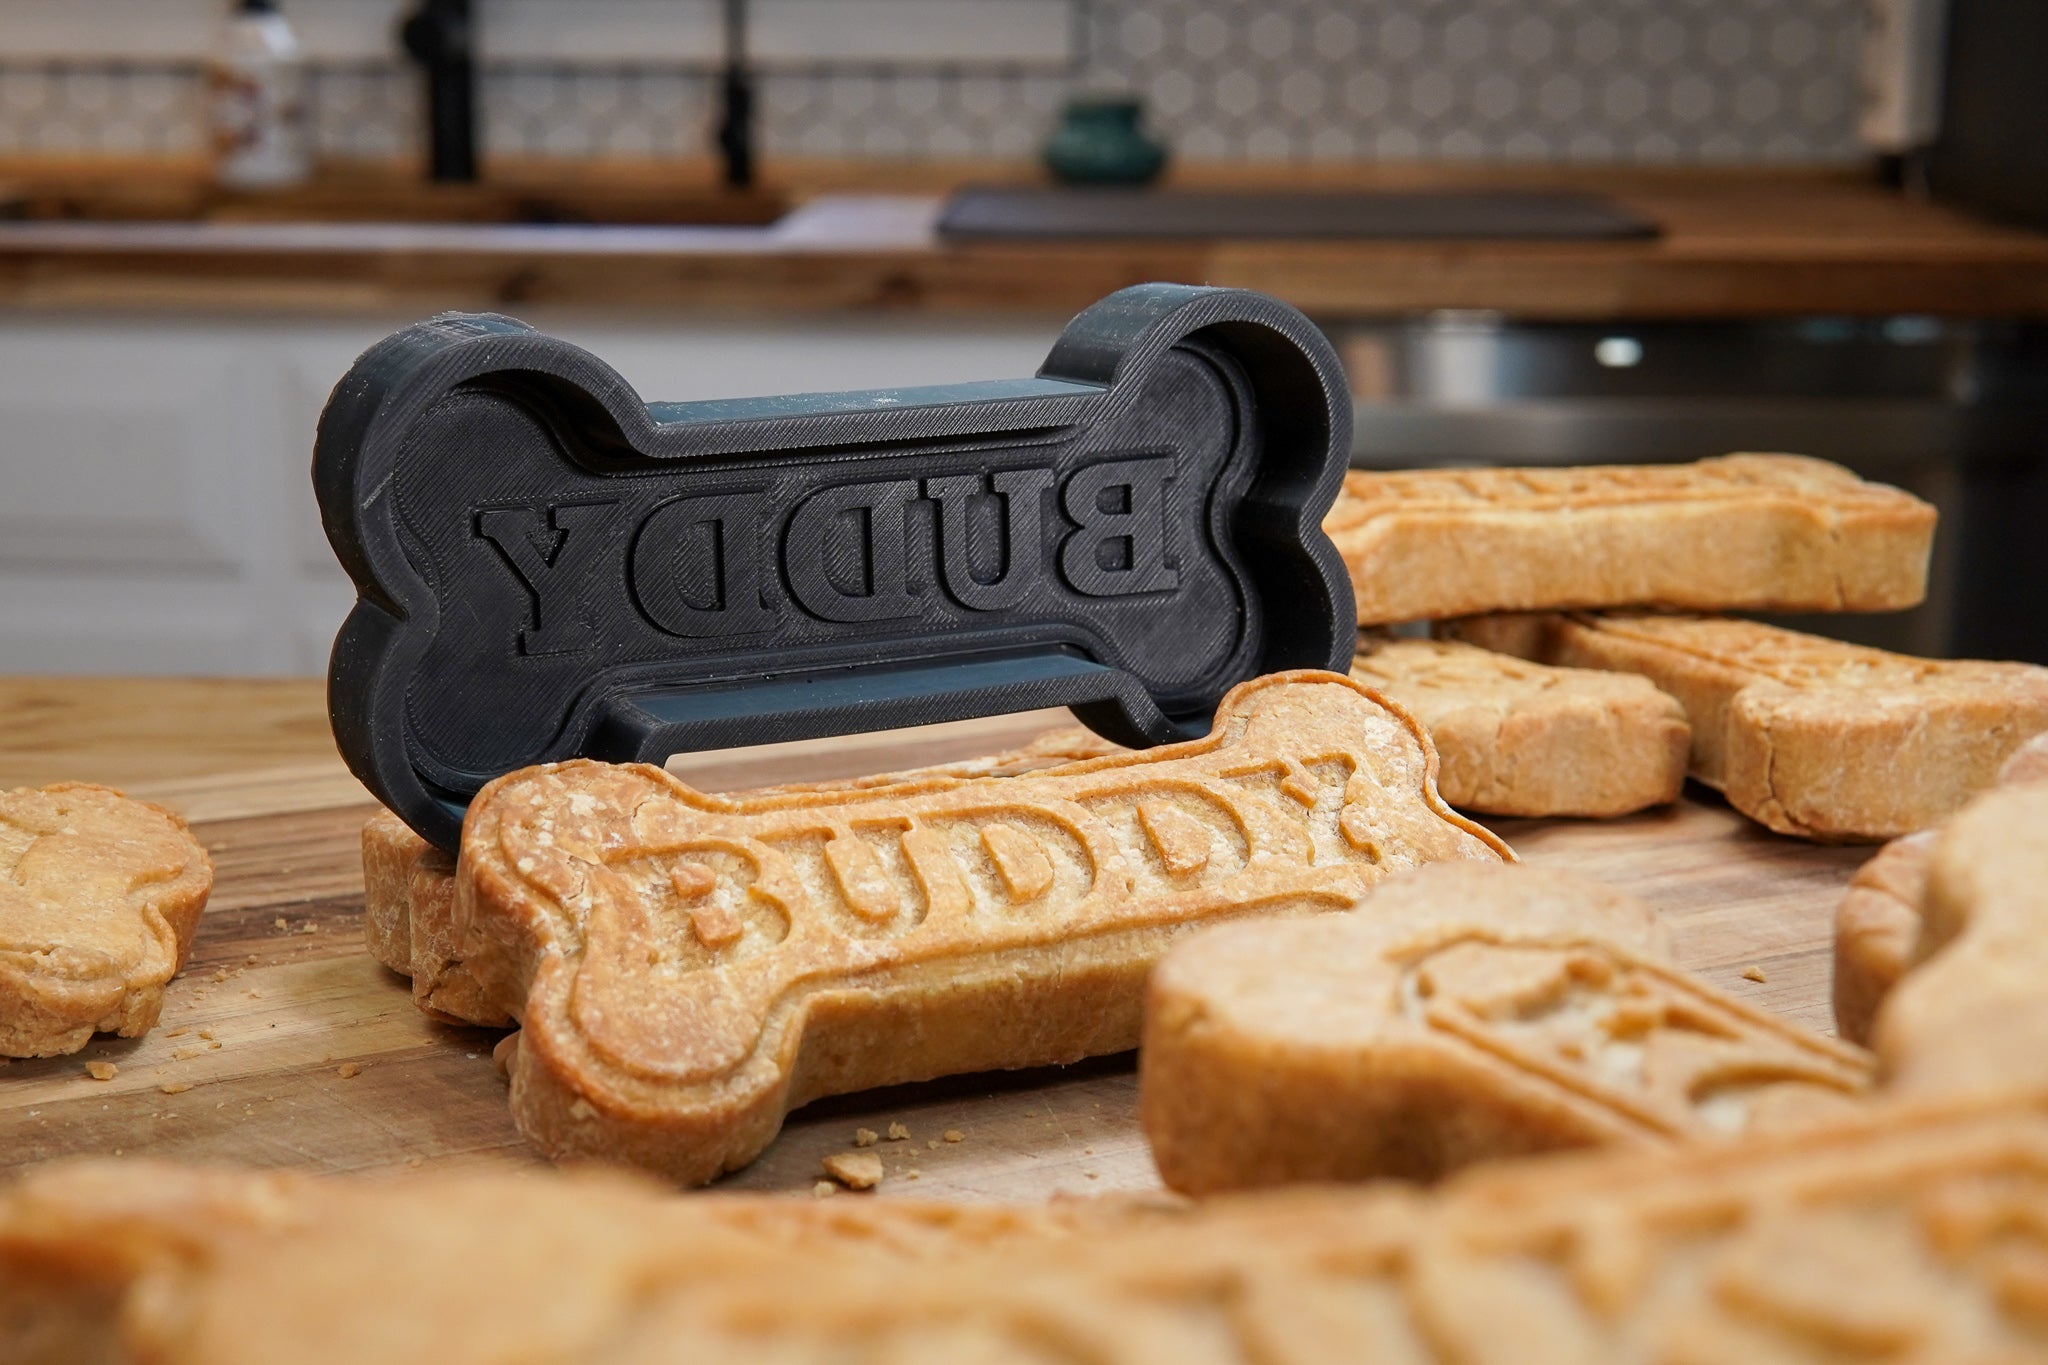 Custom Dog Treat Mold, Personalized Dog Biscuits With Pet's Name